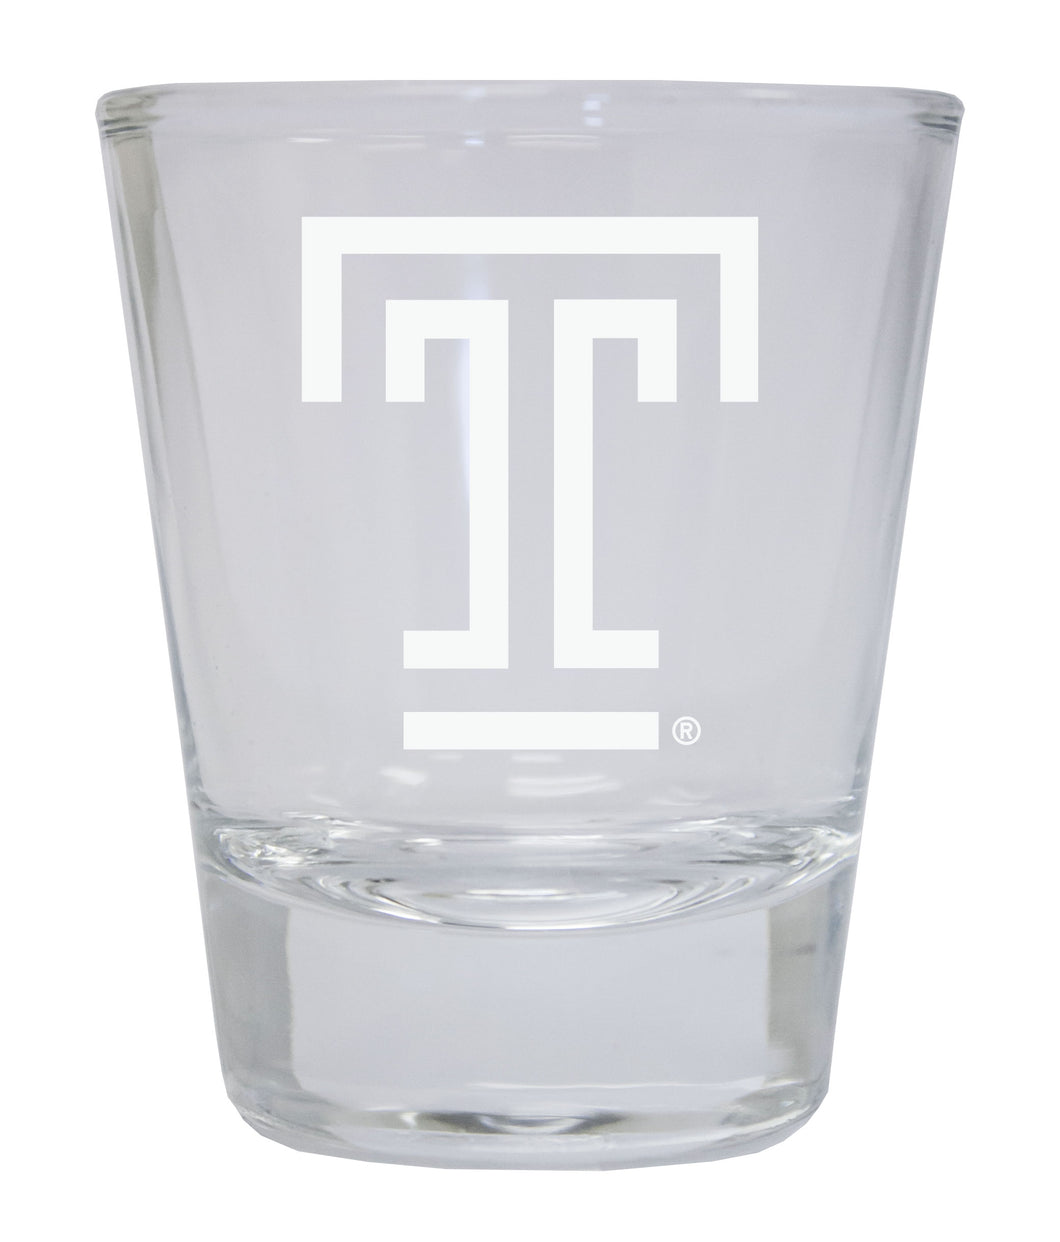 Temple University Etched Round Shot Glass Officially Licensed Collegiate Product